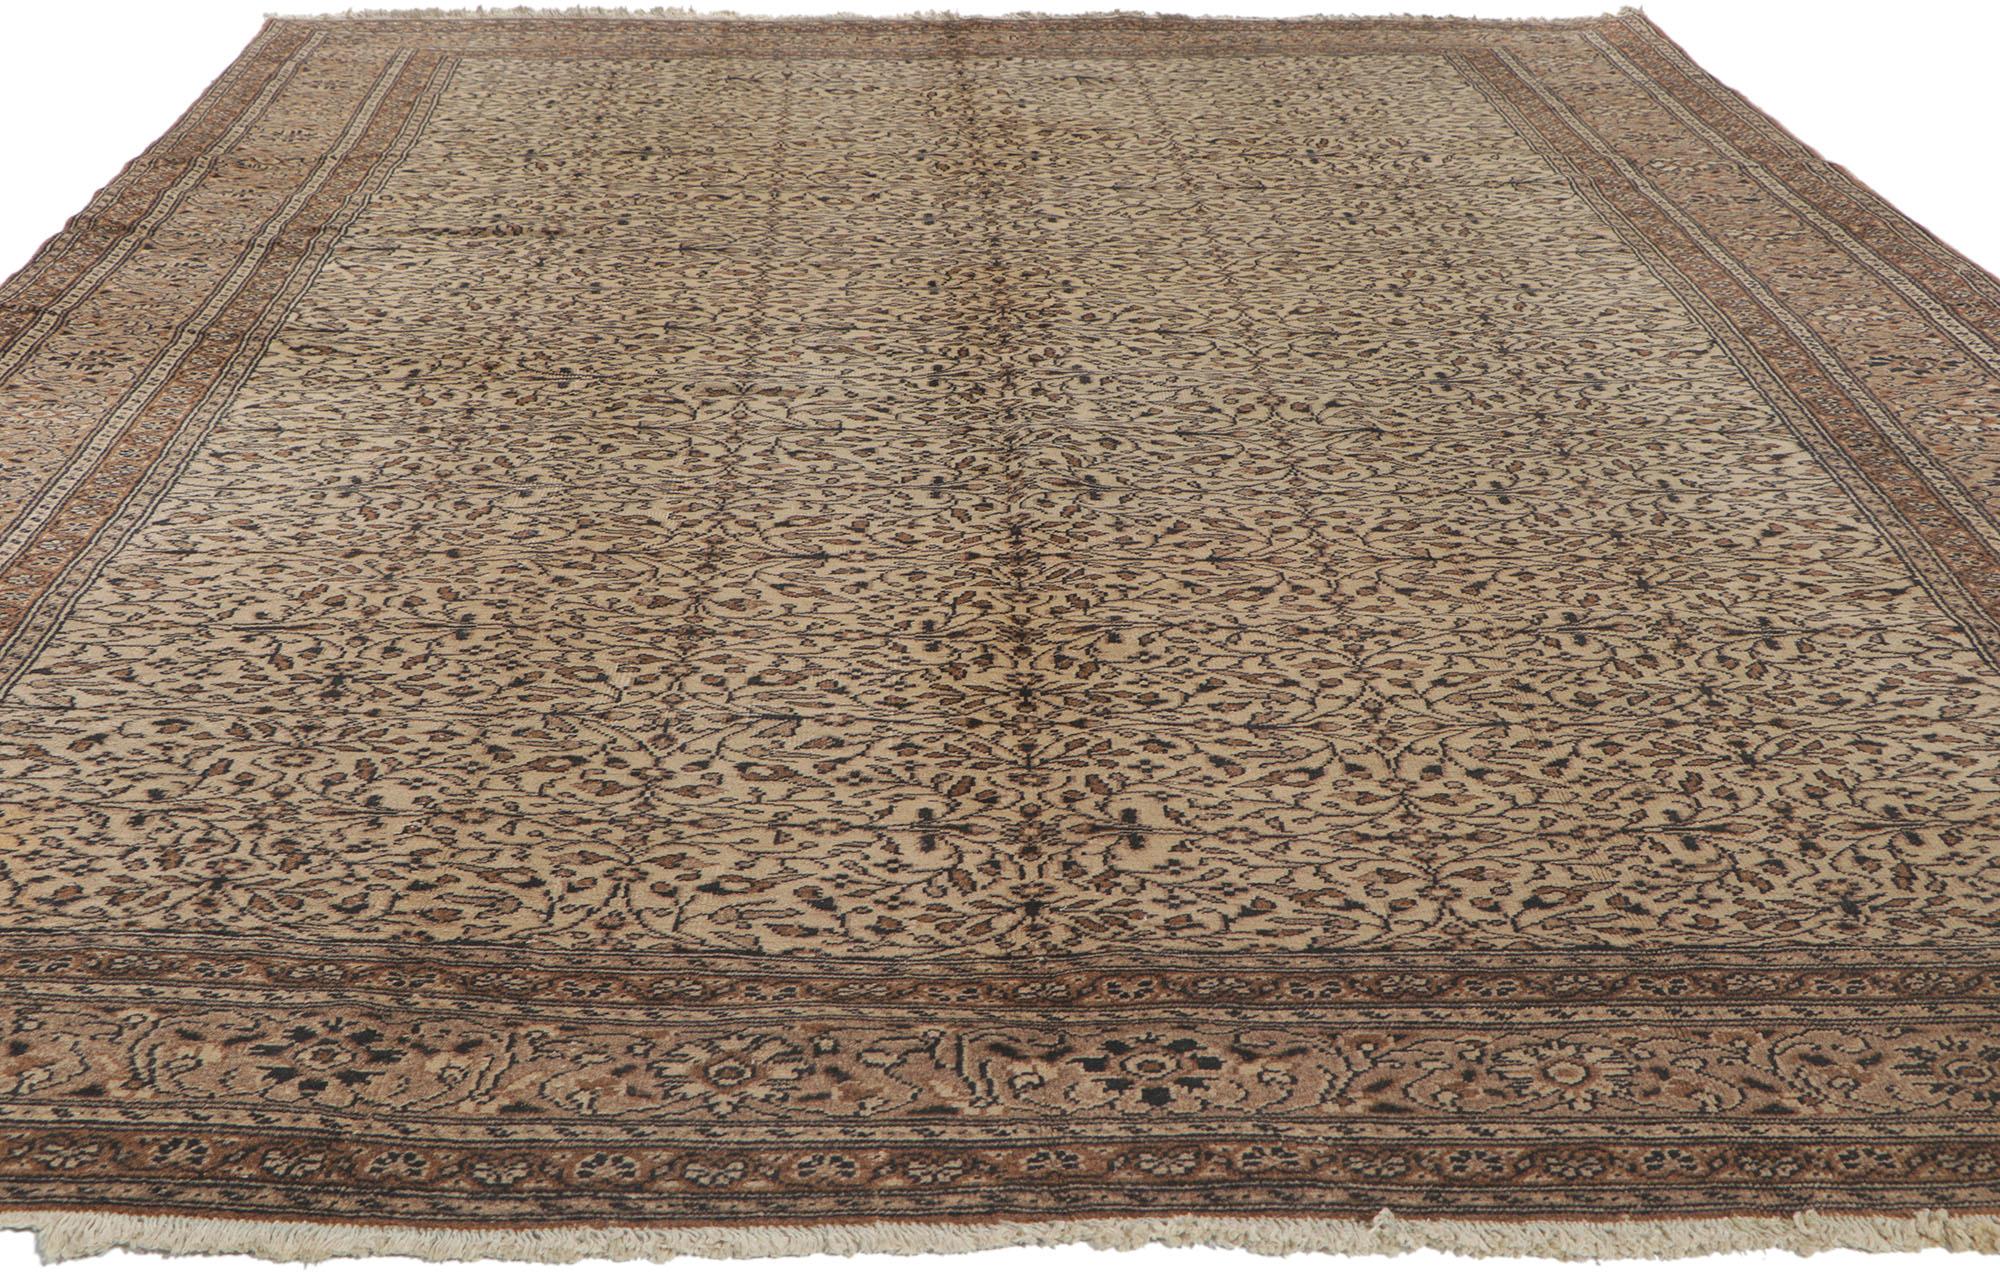 Vintage Turkish Sivas Rug with Neoclassical Style In Good Condition For Sale In Dallas, TX